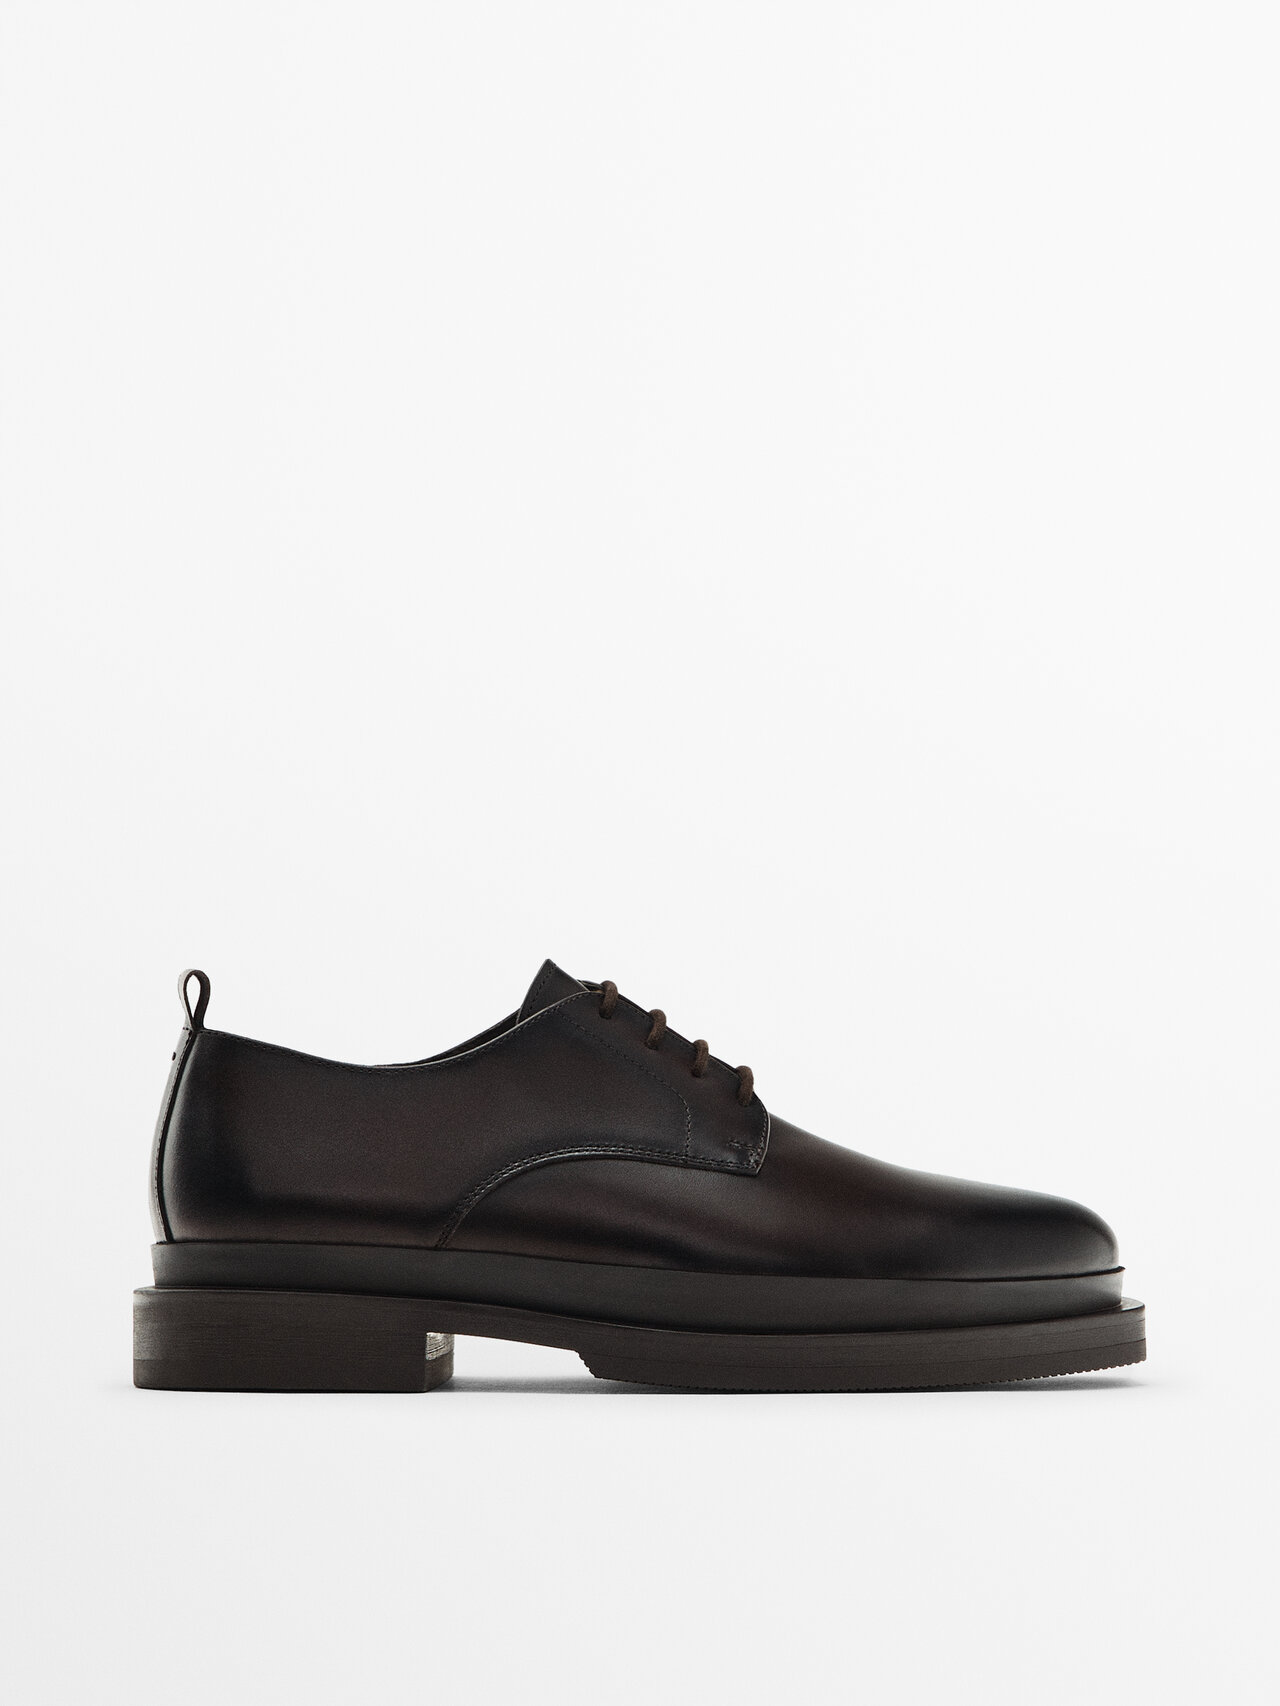 Massimo Dutti Brushed Nappa Leather Shoes - Studio In Brown